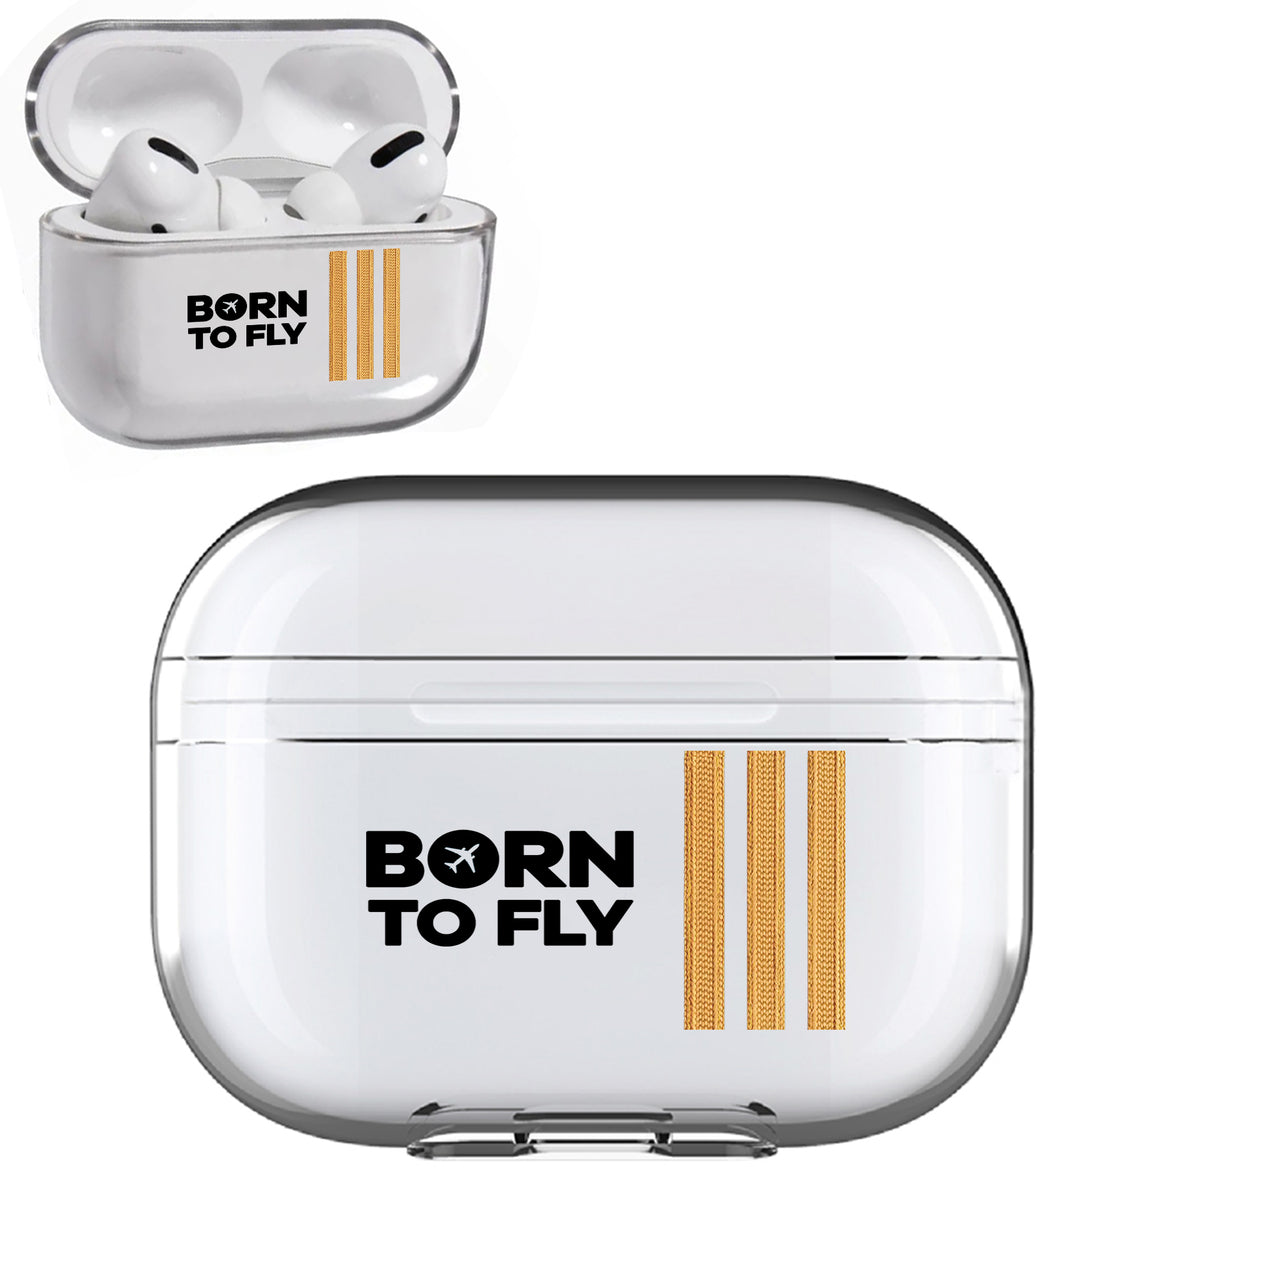 Born to Fly & Pilot Epaulettes (4,3,2 Lines) Designed Transparent Earphone AirPods "Pro" Cases